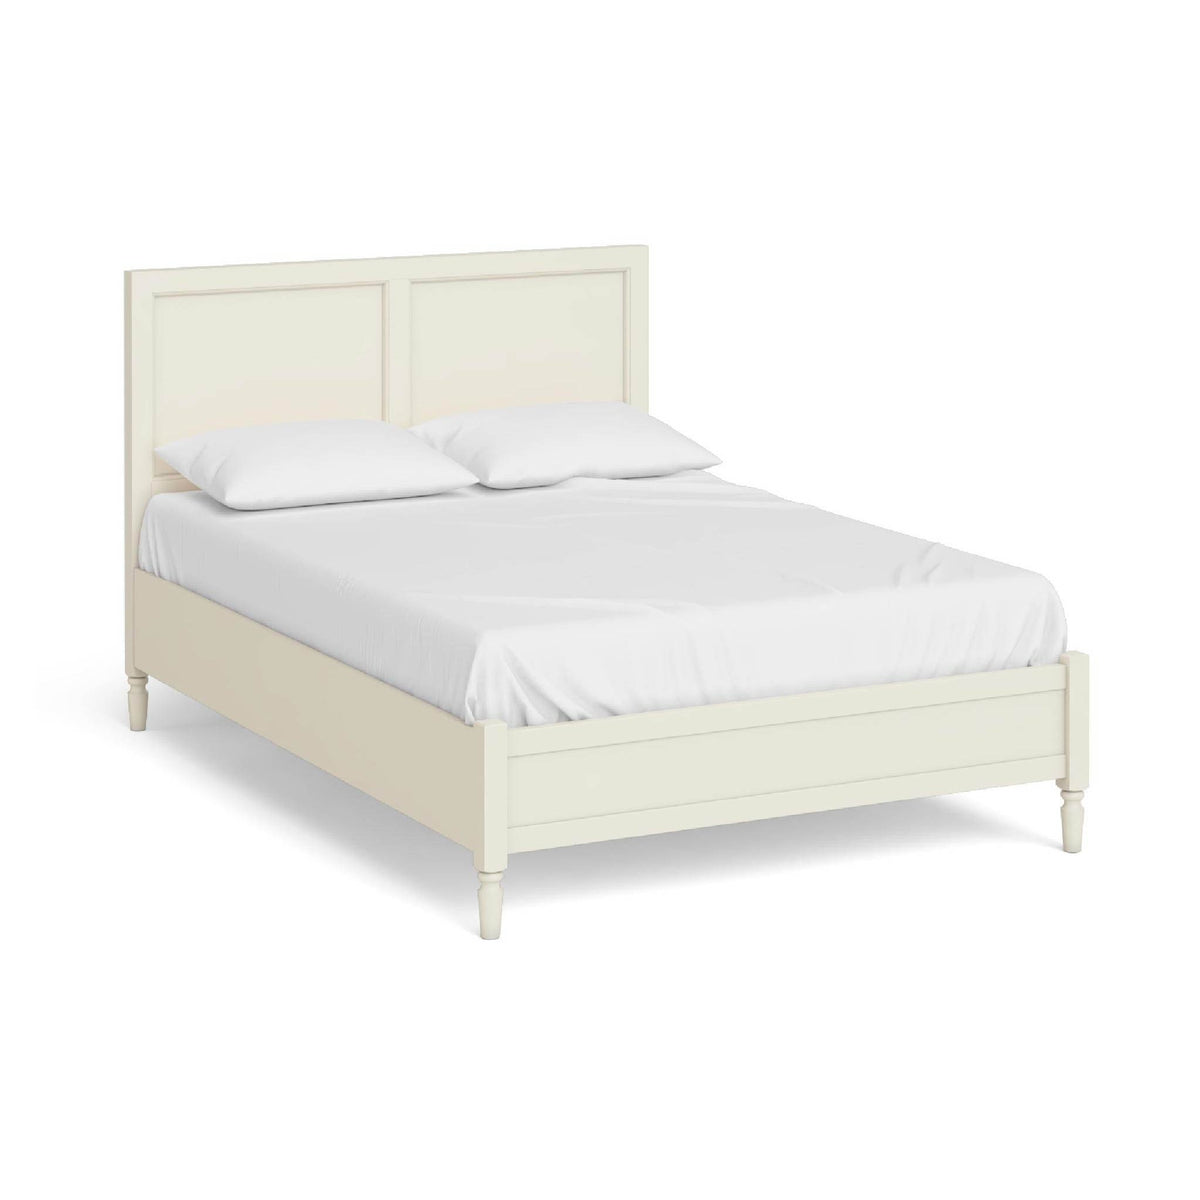 The Muslanne Cream 4'6" Double Bed Frame from Roseland Furniture